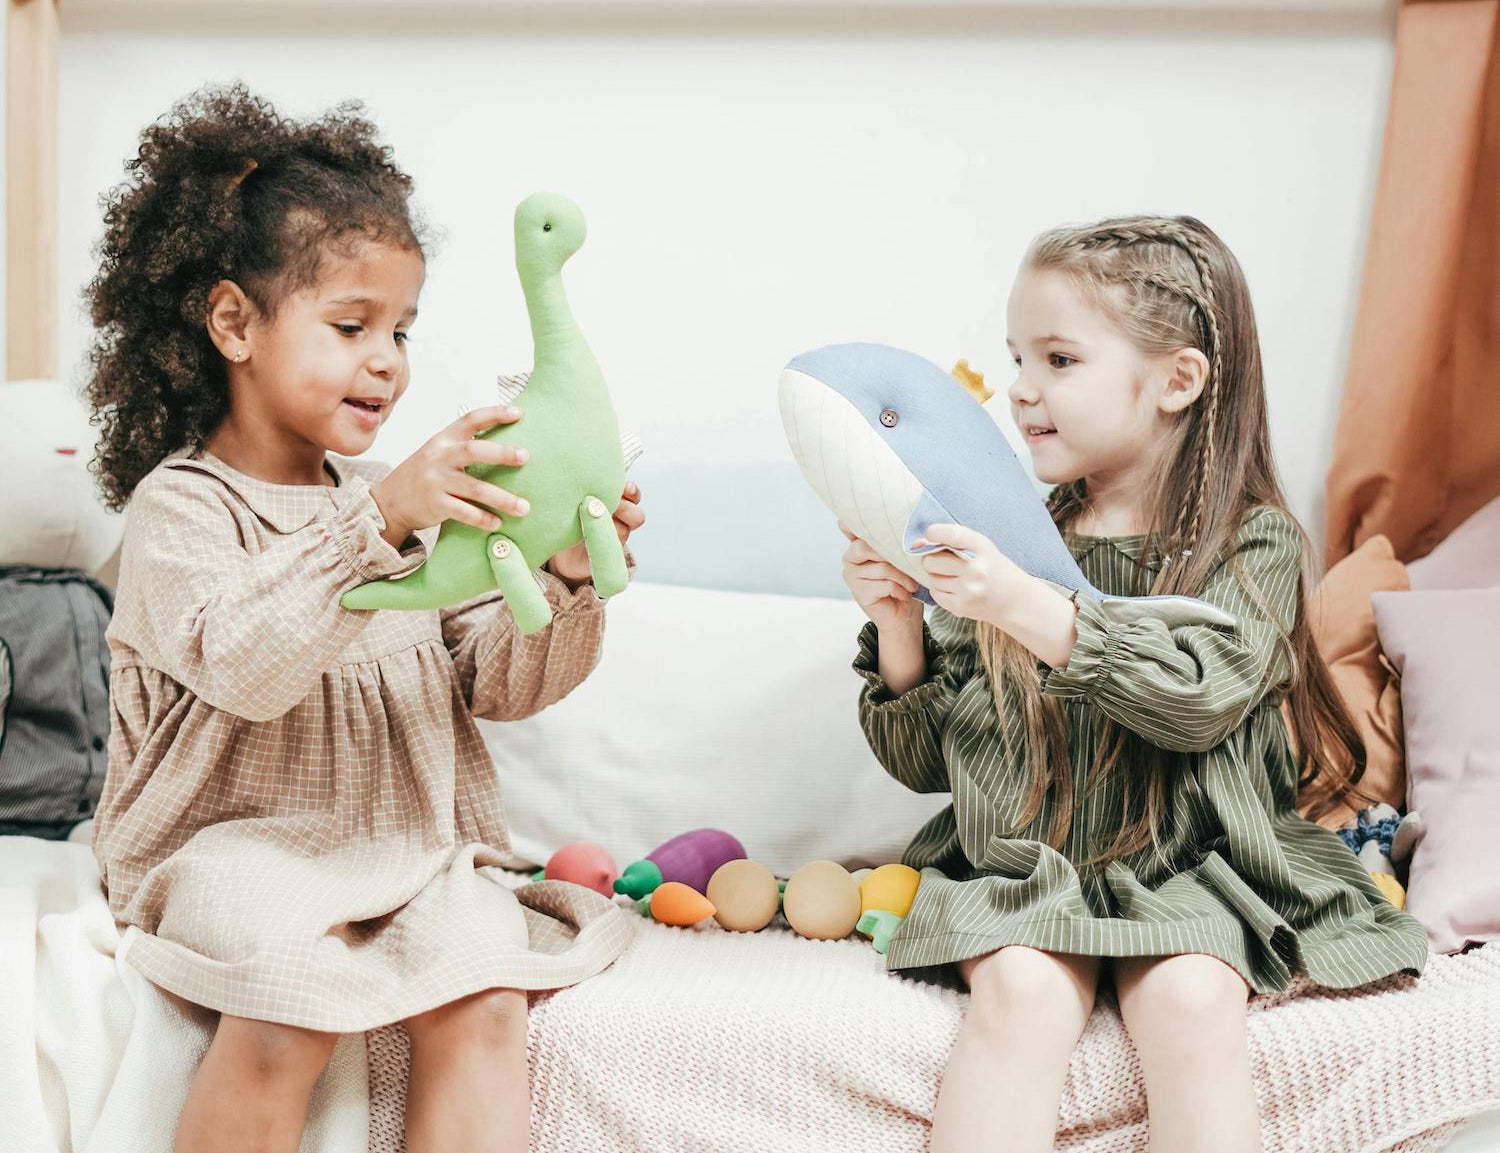 Two young children sit cross-legged on a cozy, textured throw, joyfully playing with plush toys—a green dinosaur and a blue whale—against a background of soft pastels and playful decor.